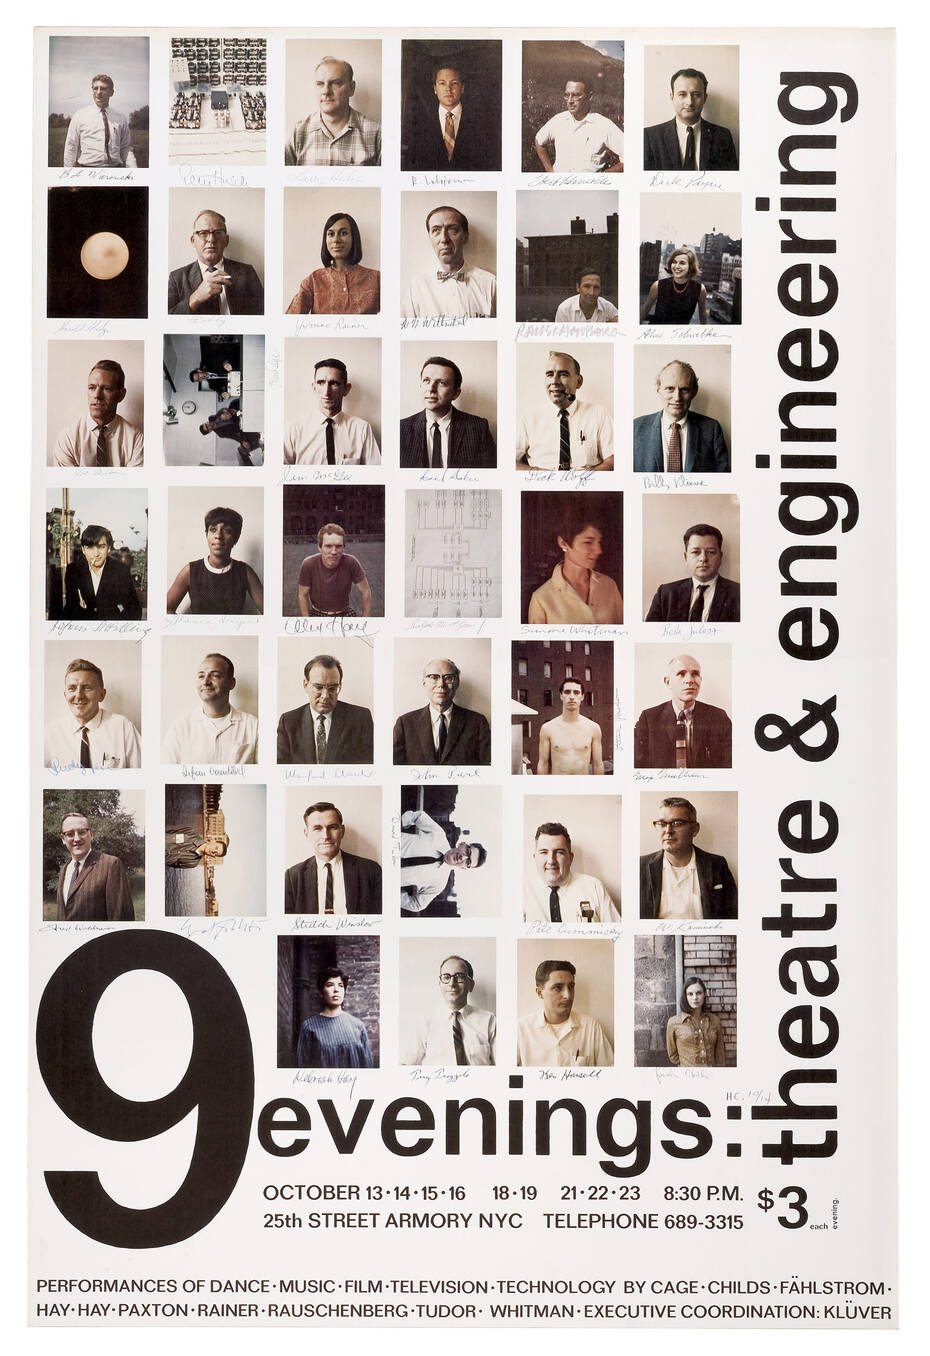 9 Evenings poster designed by Robert Rauschenberg, signed by all participants © Robert Rauschenberg Foundation / Licensed by VAGA, NYC